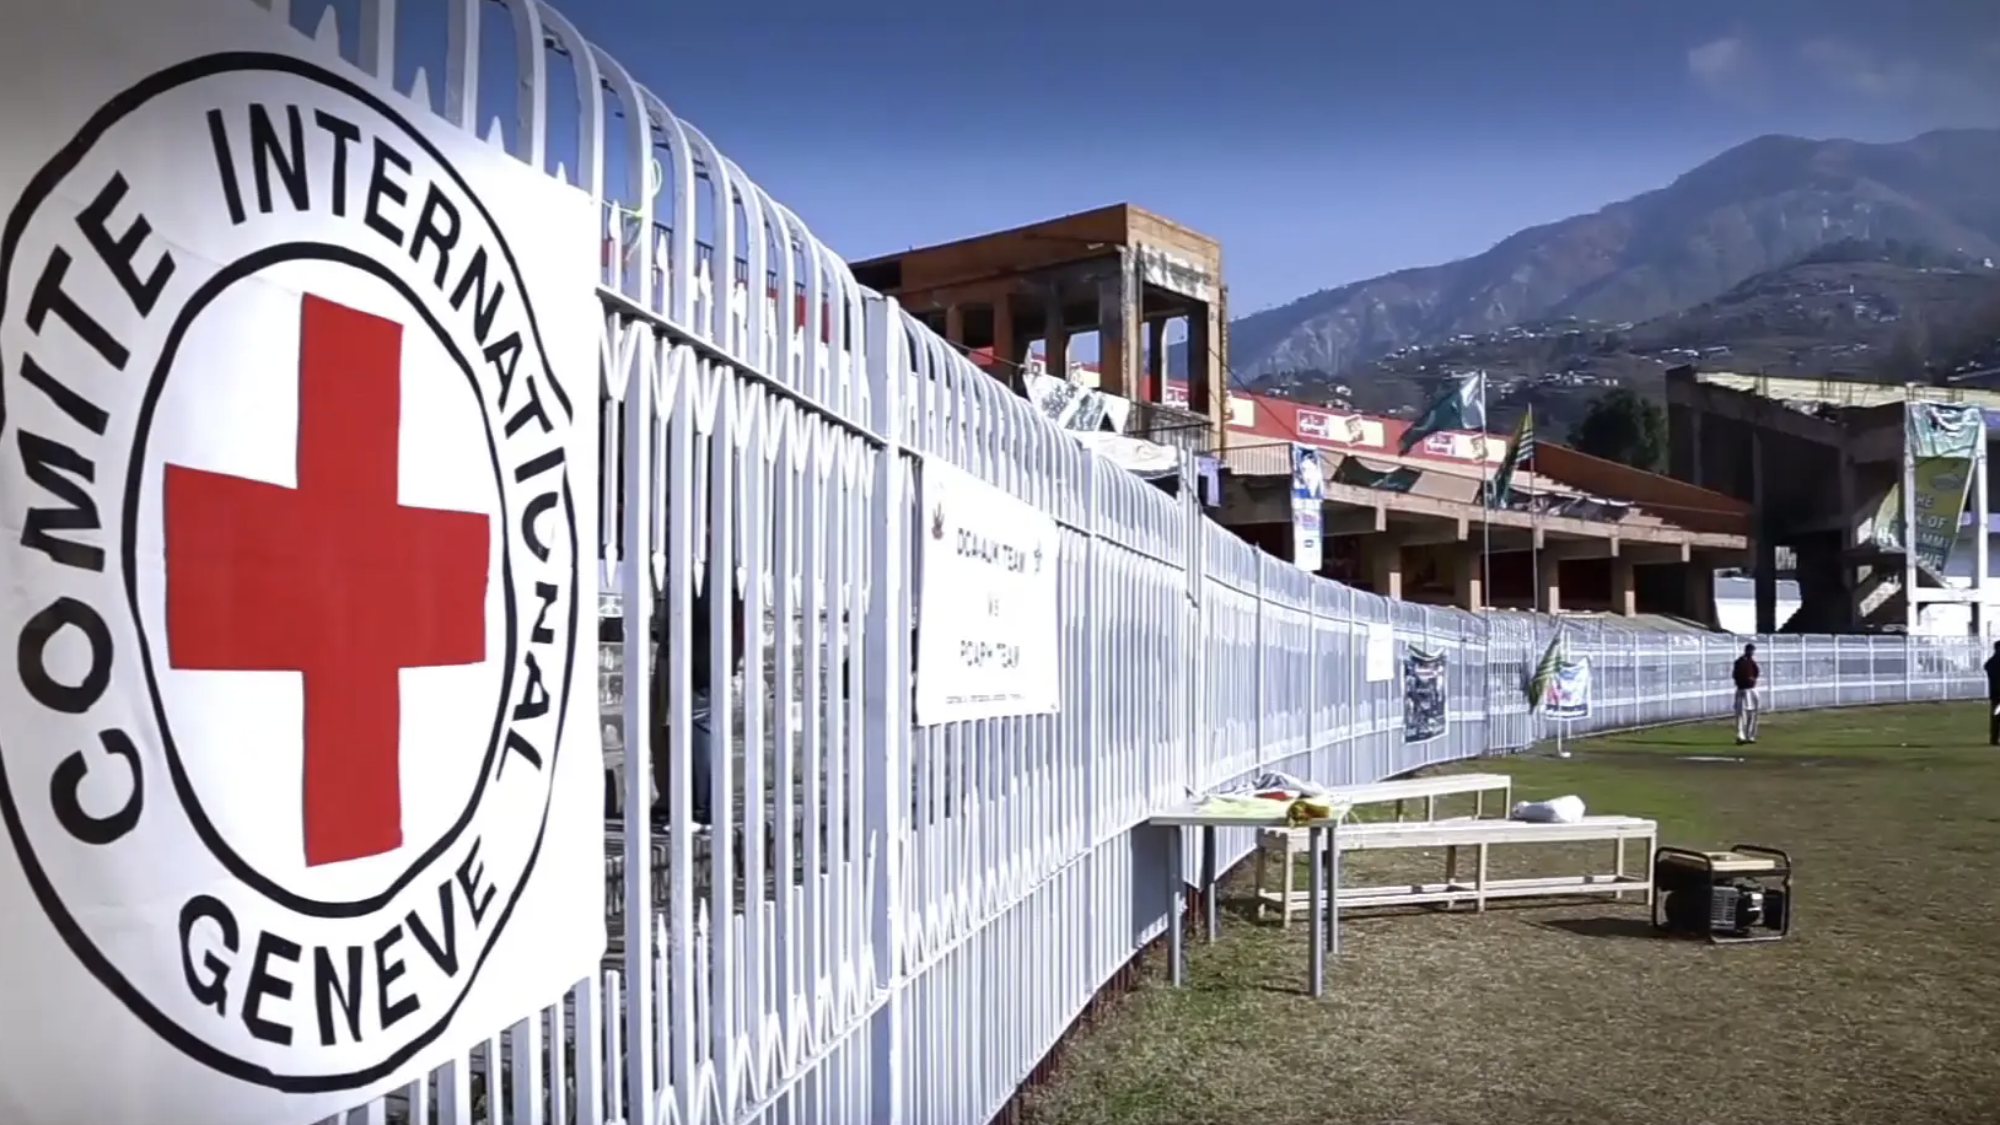 The International Committee of the Red Cross logo on a white fence.